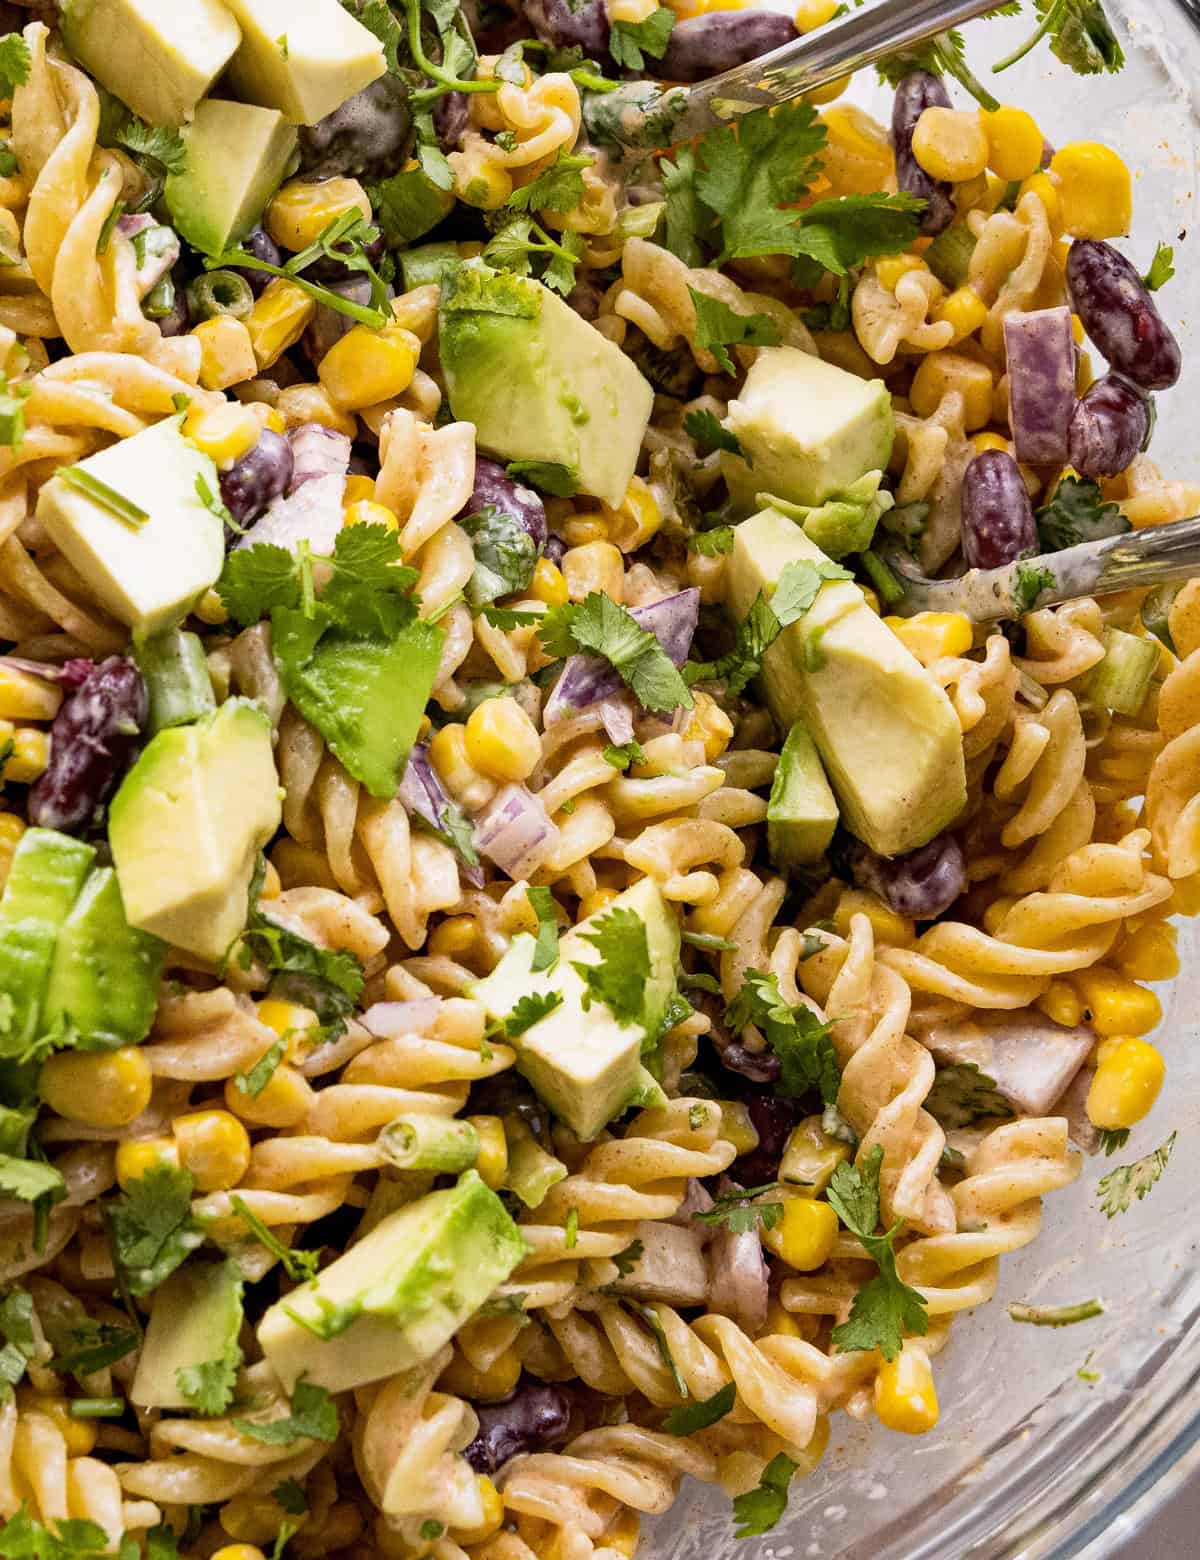 All of the bold flavors of Mexican street corn, but in a delicious chilled pasta salad! Perfect for summer cookouts and potlucks, and super easy to customize to your tastes.